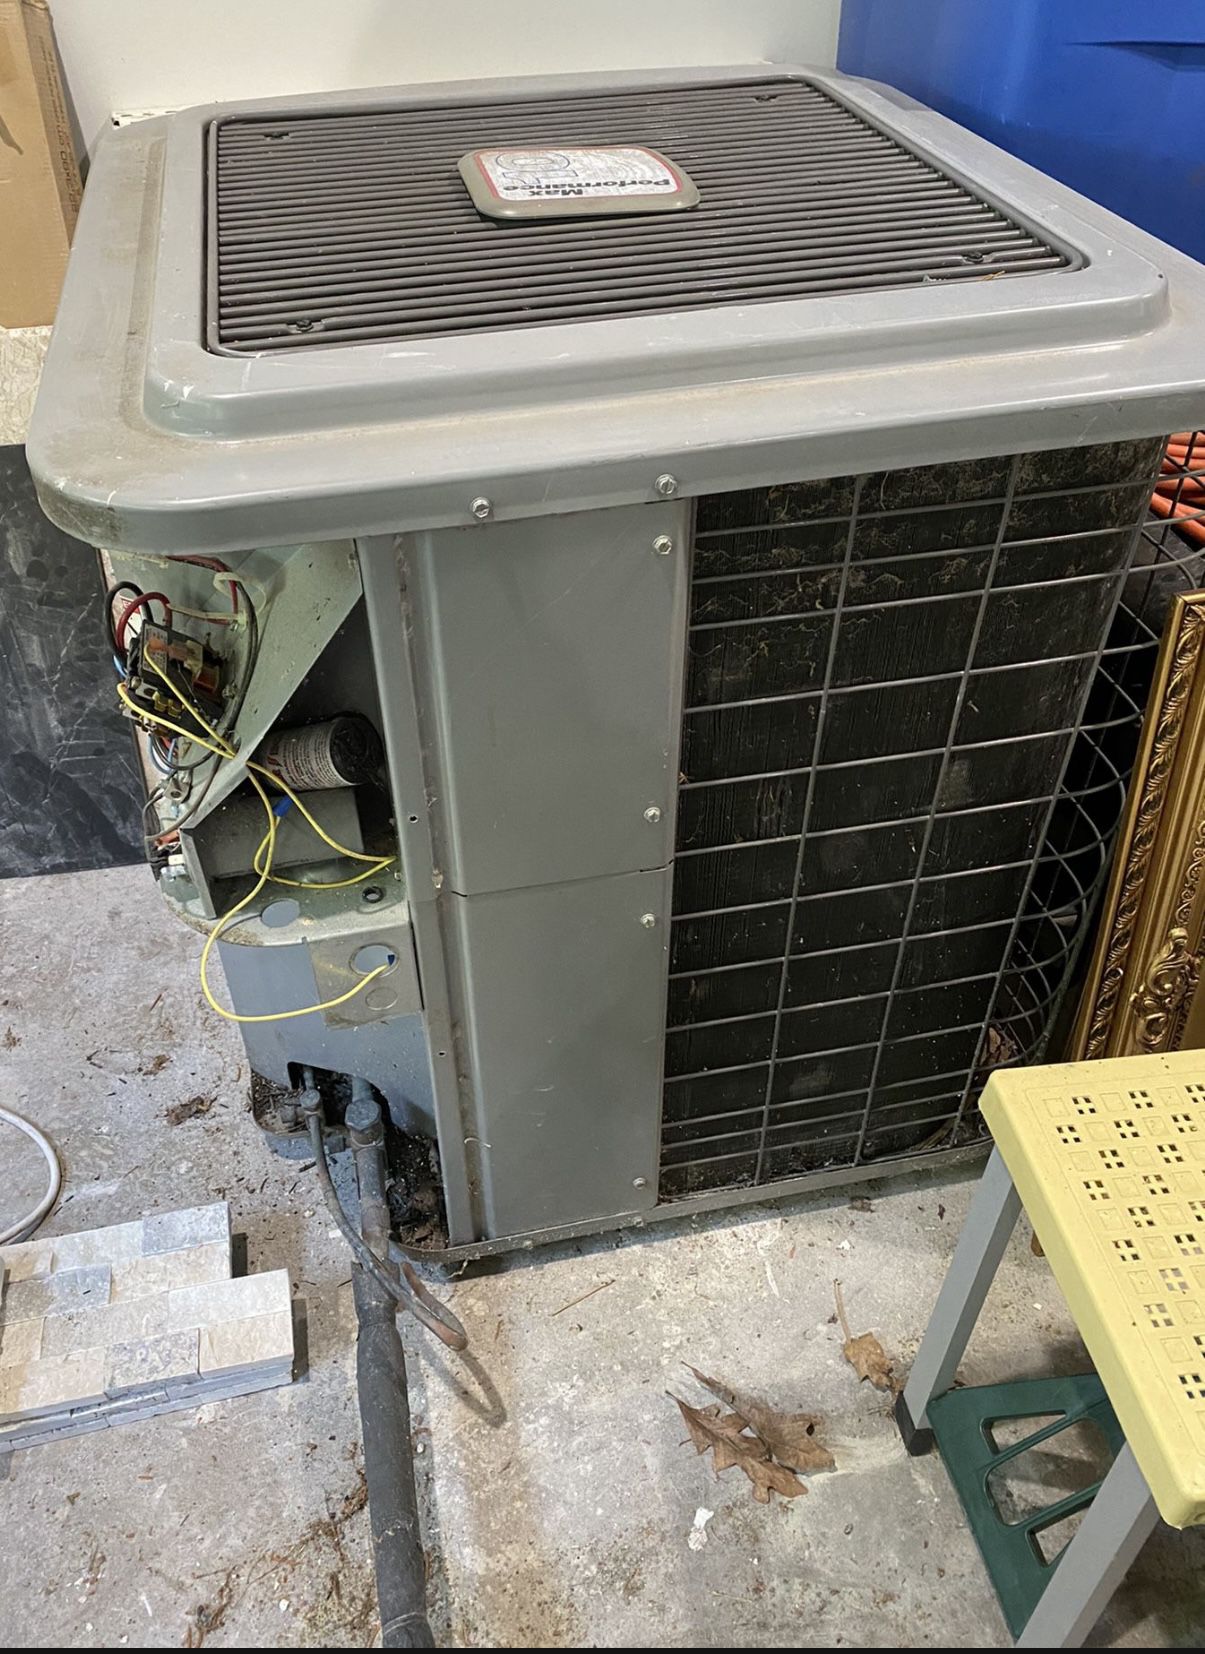 Central A/C For Sale 